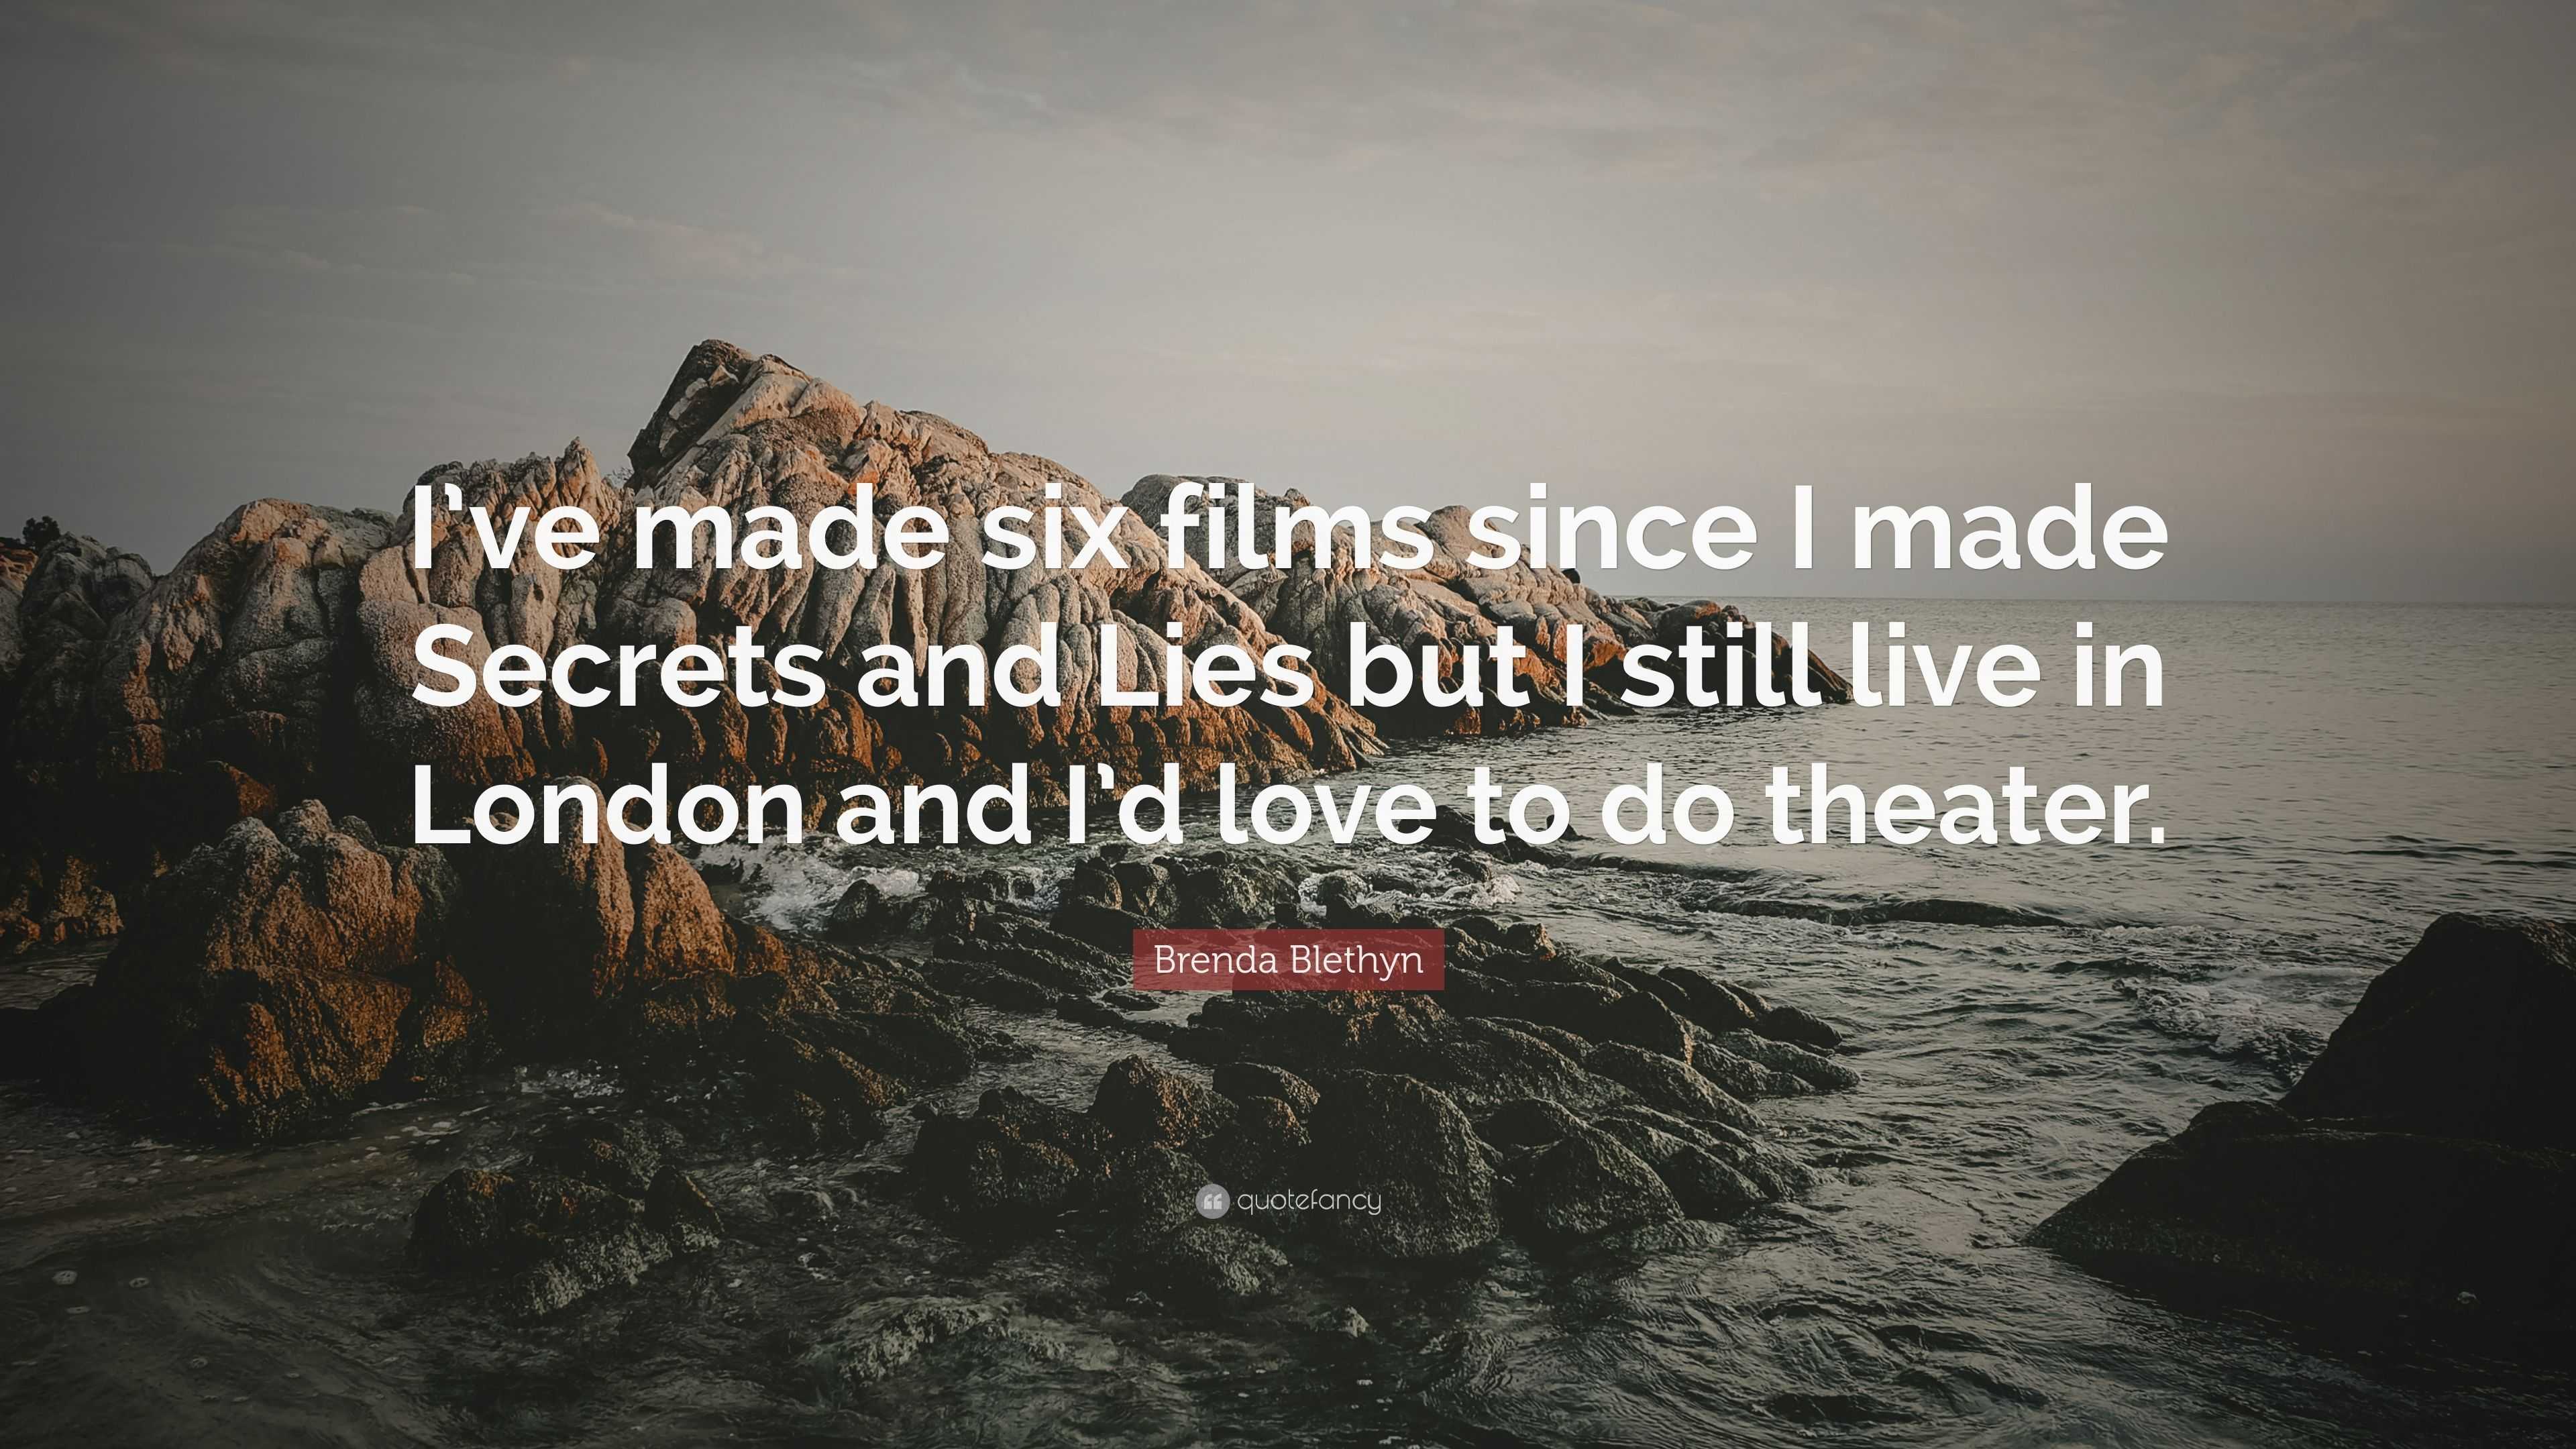 Brenda Blethyn Quote: “I’ve made six films since I made Secrets and ...